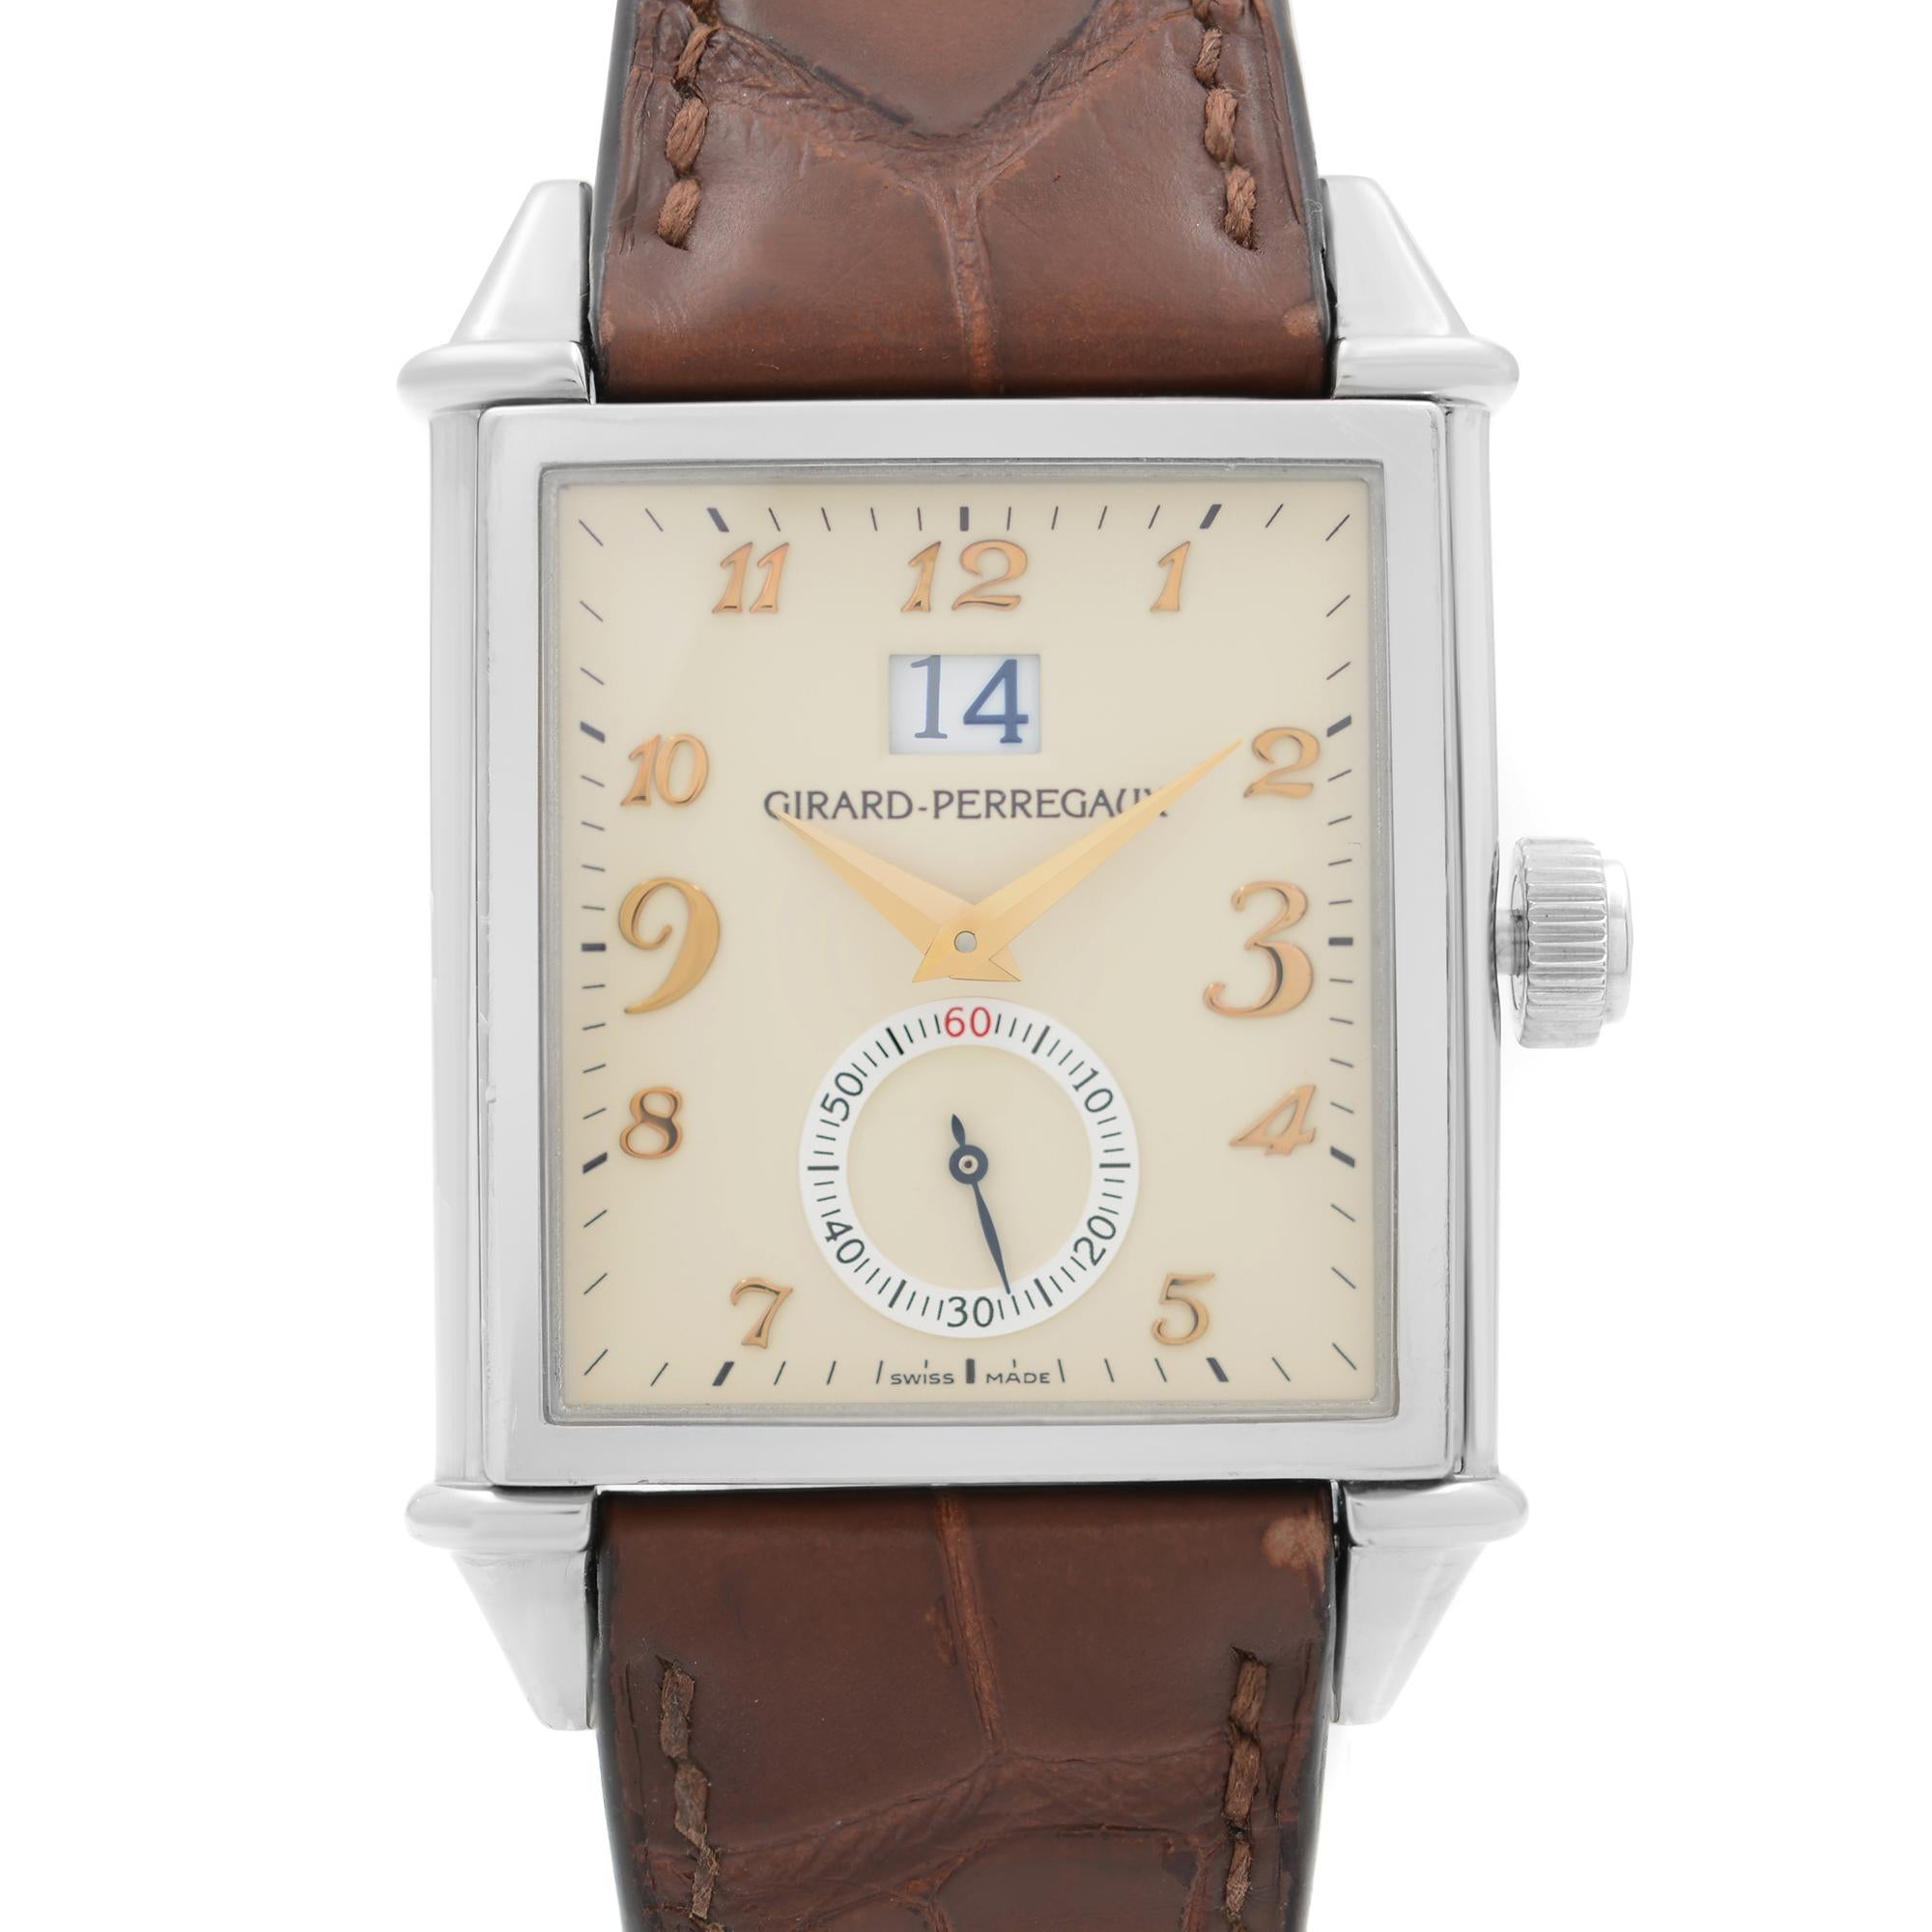 Pre Owned Girard Perregaux Vintage 1945 Steel Automatic Men's Watch 25805-11-822-BAEA. Case Shows Dents & Micro Scratches. Leather Band Shows Little Wear on the inside of the Band. This Beautiful Timepiece Features: Stainless Steel Case with a Brown